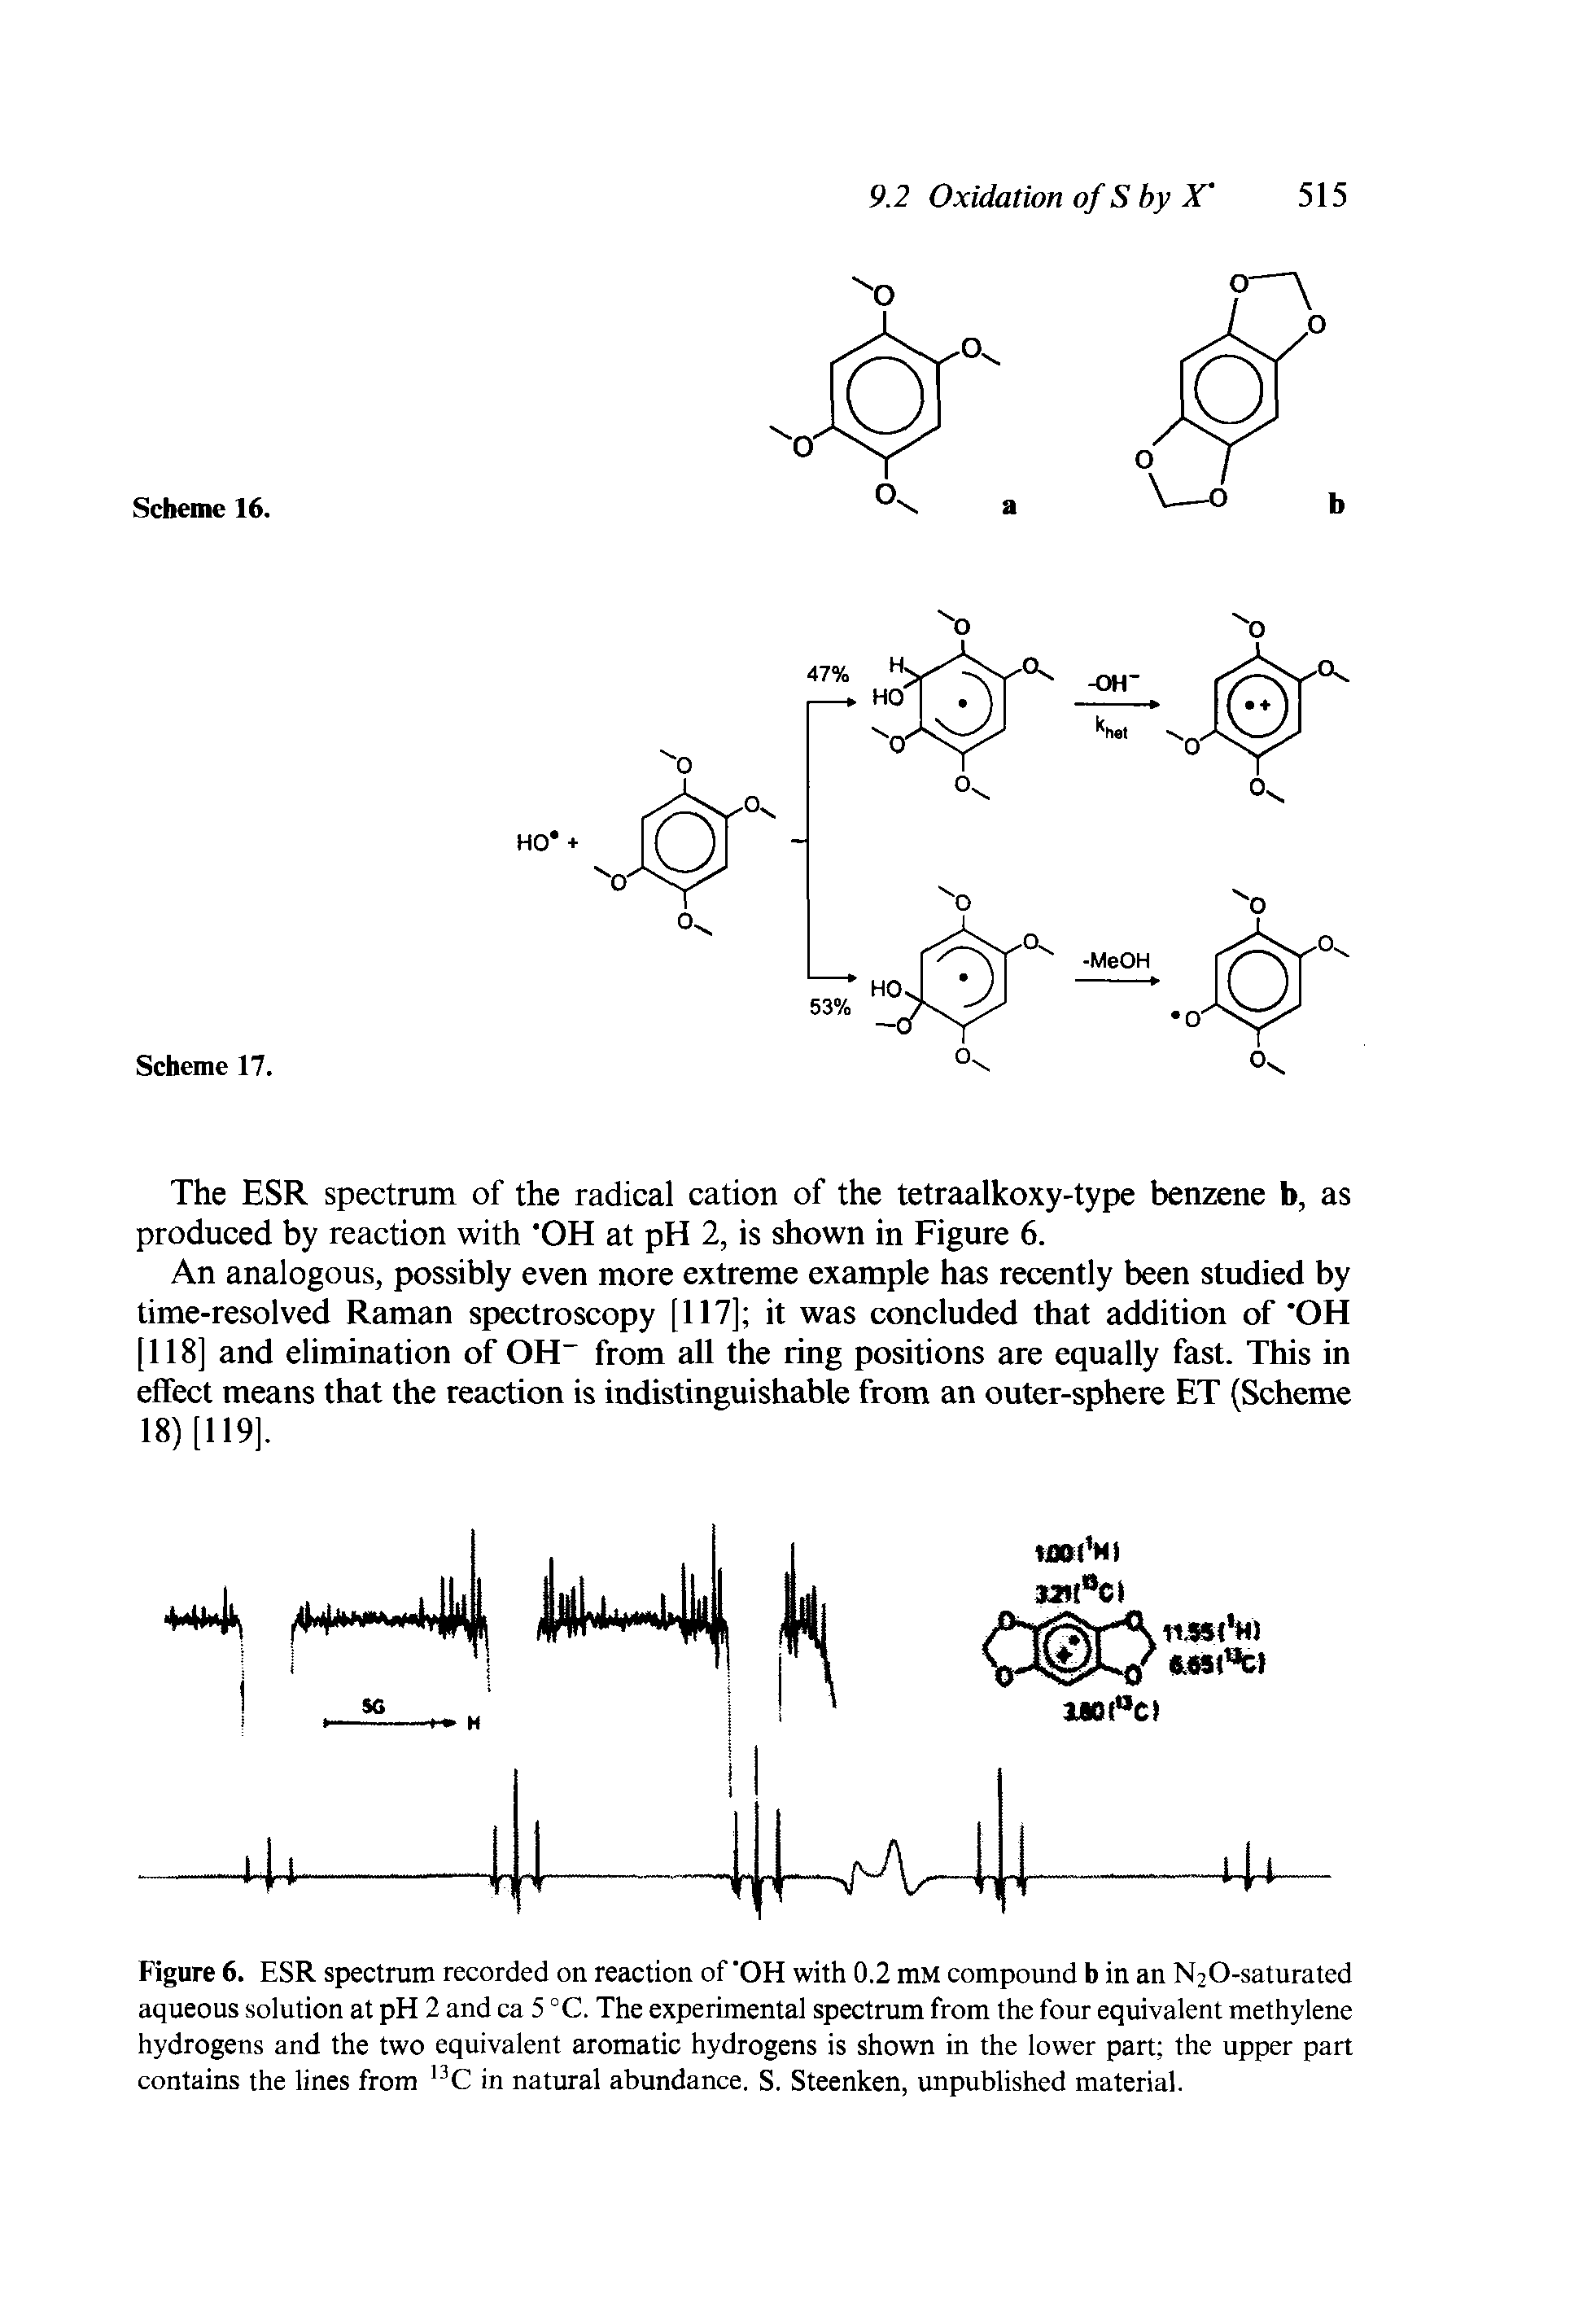 Figure 6. ESR spectrum recorded on reaction of OH with 0.2 mM compound b in an N20-saturated aqueous solution at pH 2 and ca 5 °C. The experimental spectrum from the four equivalent methylene hydrogens and the two equivalent aromatic hydrogens is shown in the lower part the upper part contains the lines from C in natural abundance. S. Steenken, unpublished material.